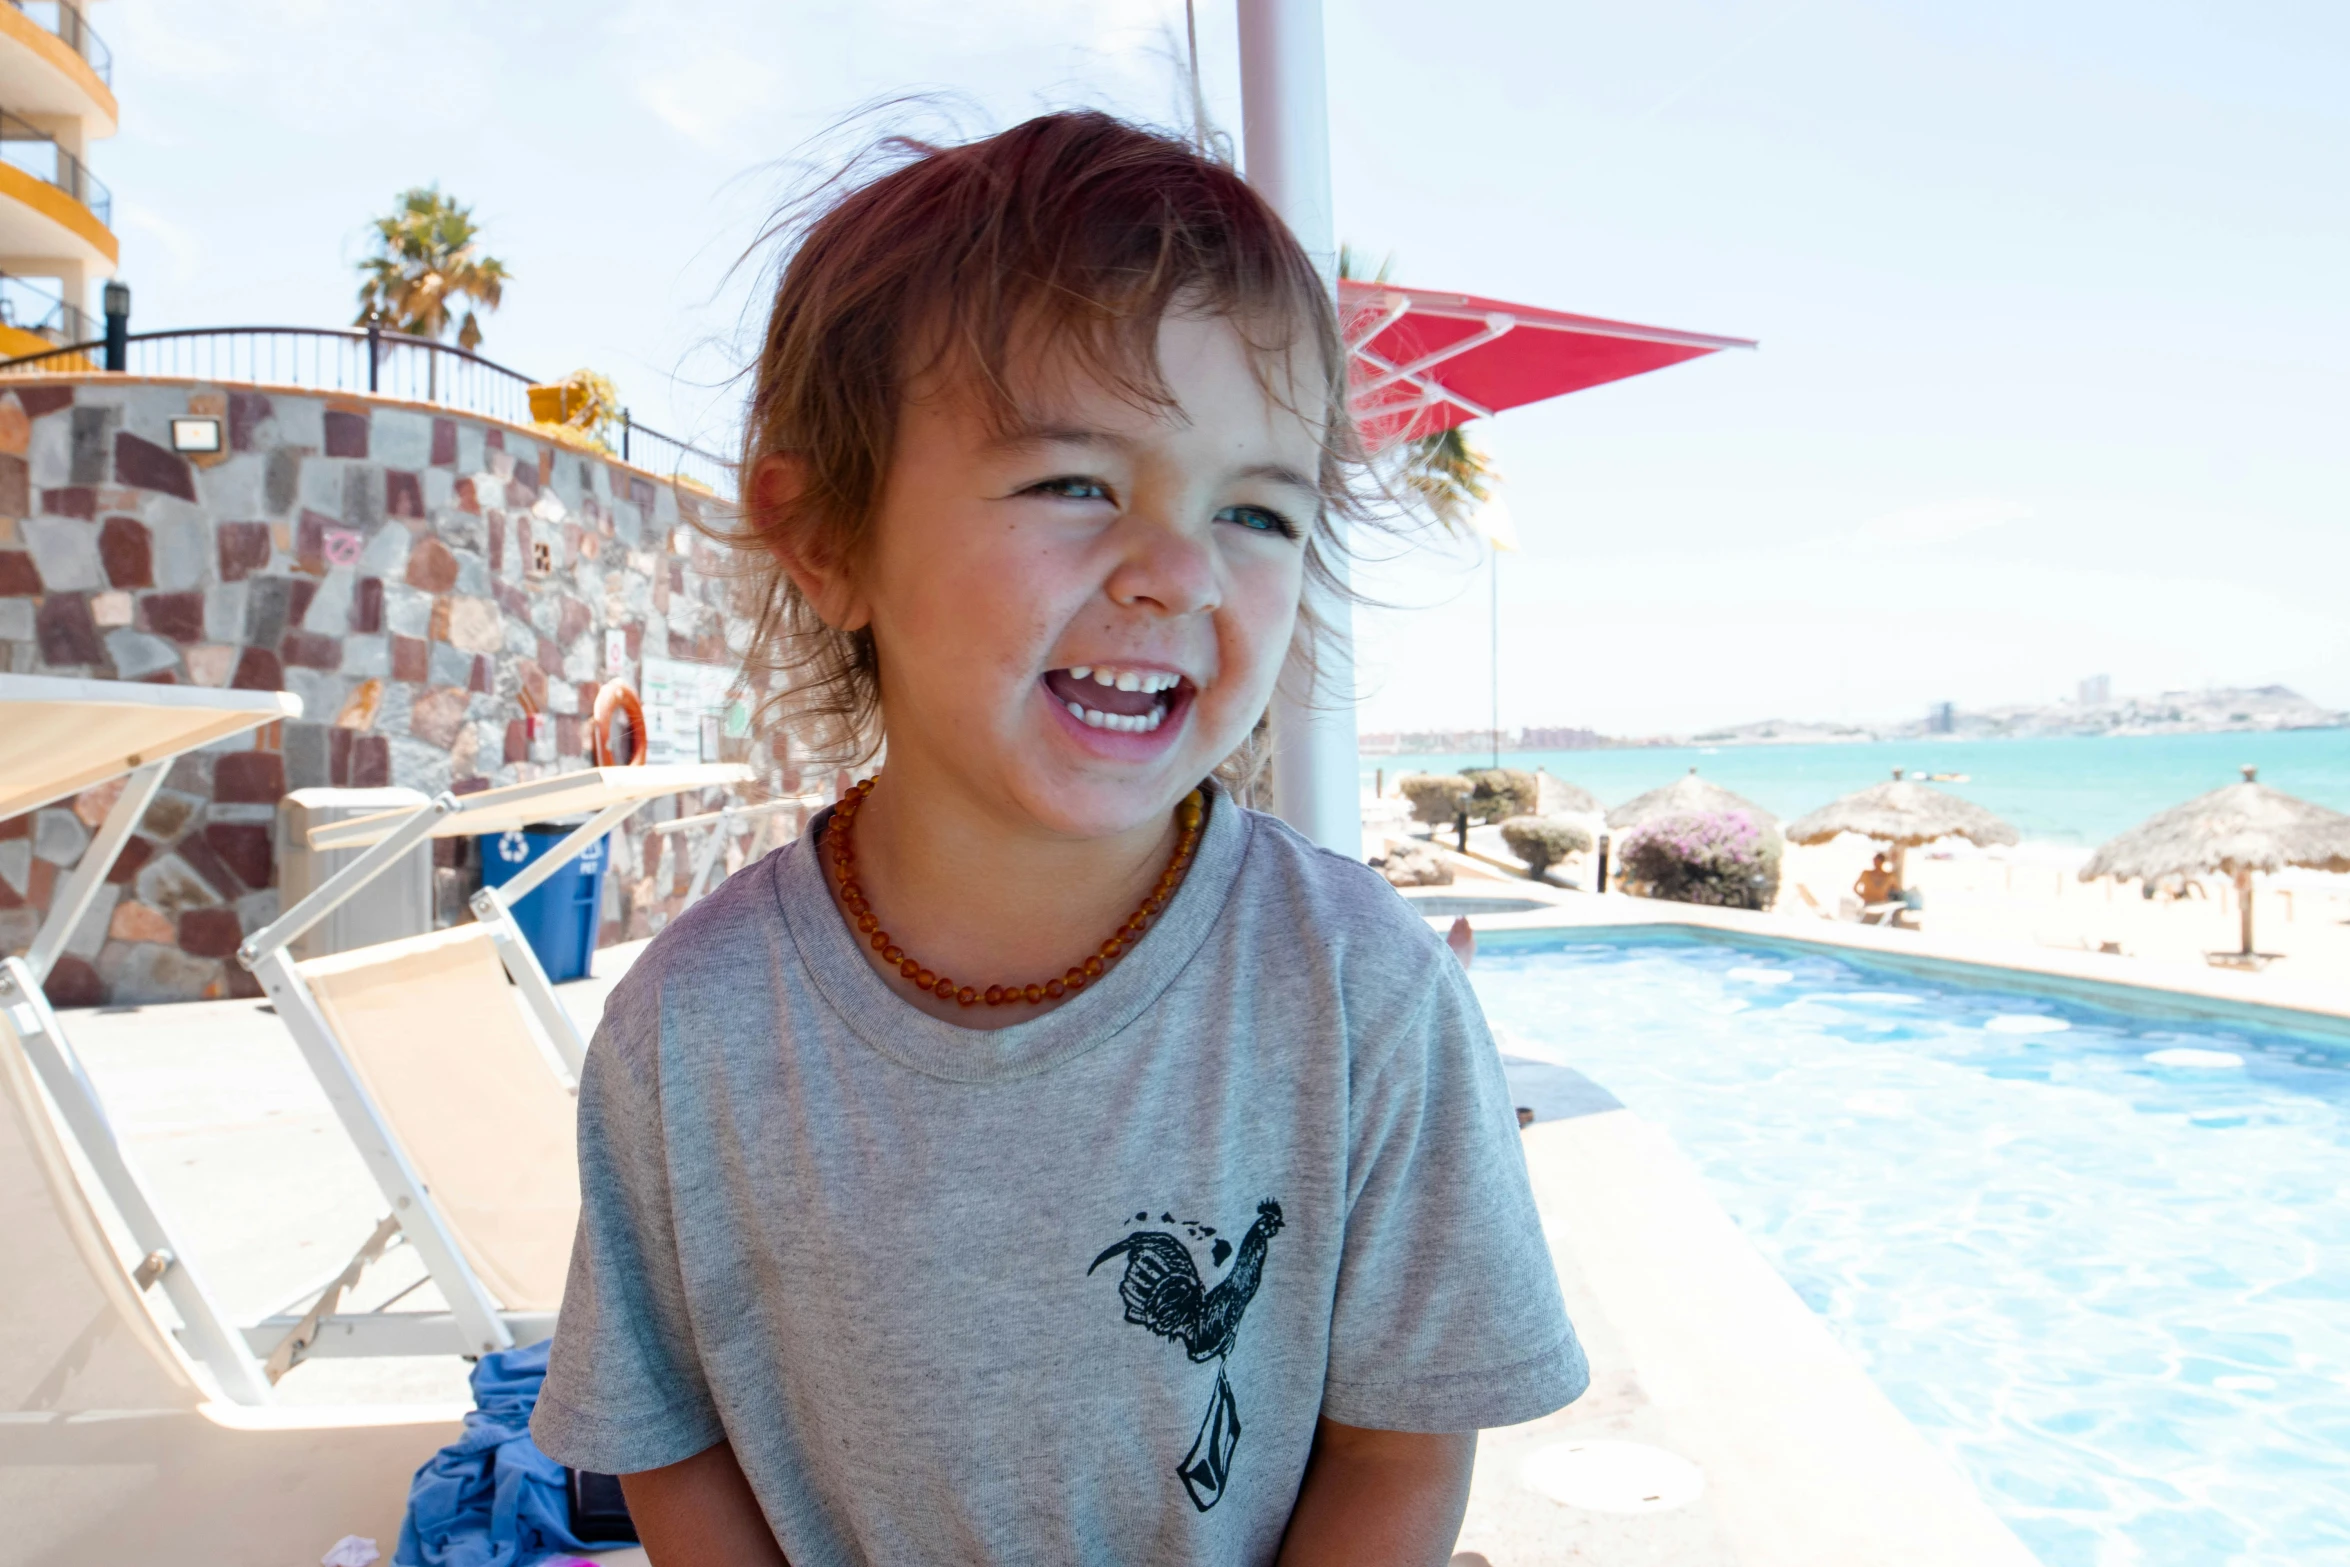 a young child in grey shirt next to a swimming pool